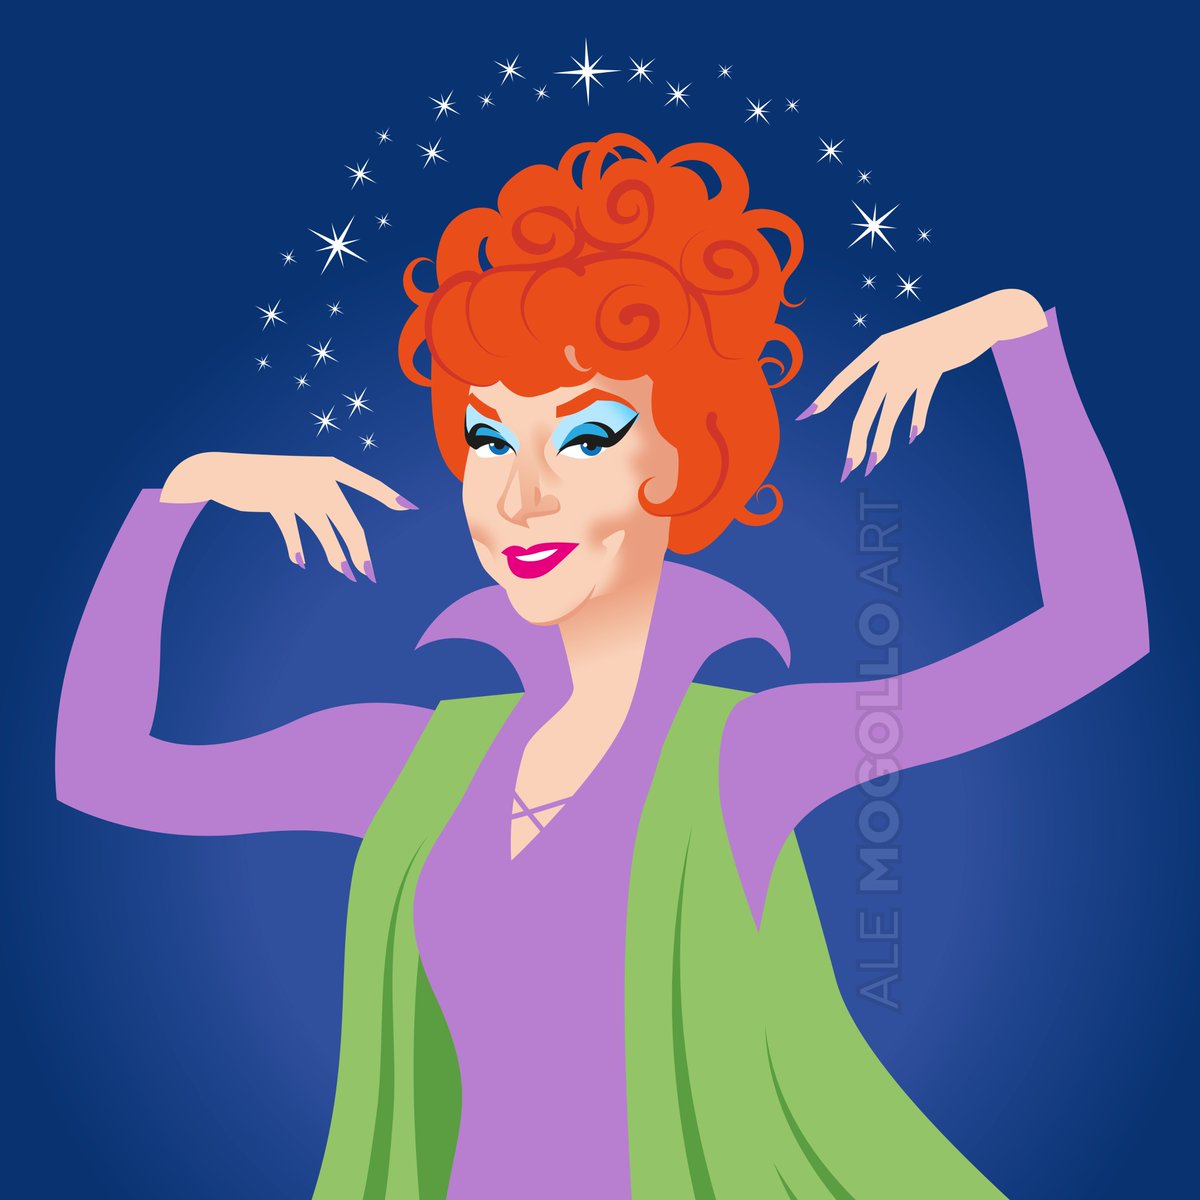 Remembering the wonderful Agnes Moorehead on her birthday! Unforgettable as Endora in Bewitched.
#agnesmoorhead #endora #bewitched #samantha #tvshow #witch #sitcom #classic #retrotv #vintage #alejandromogolloart